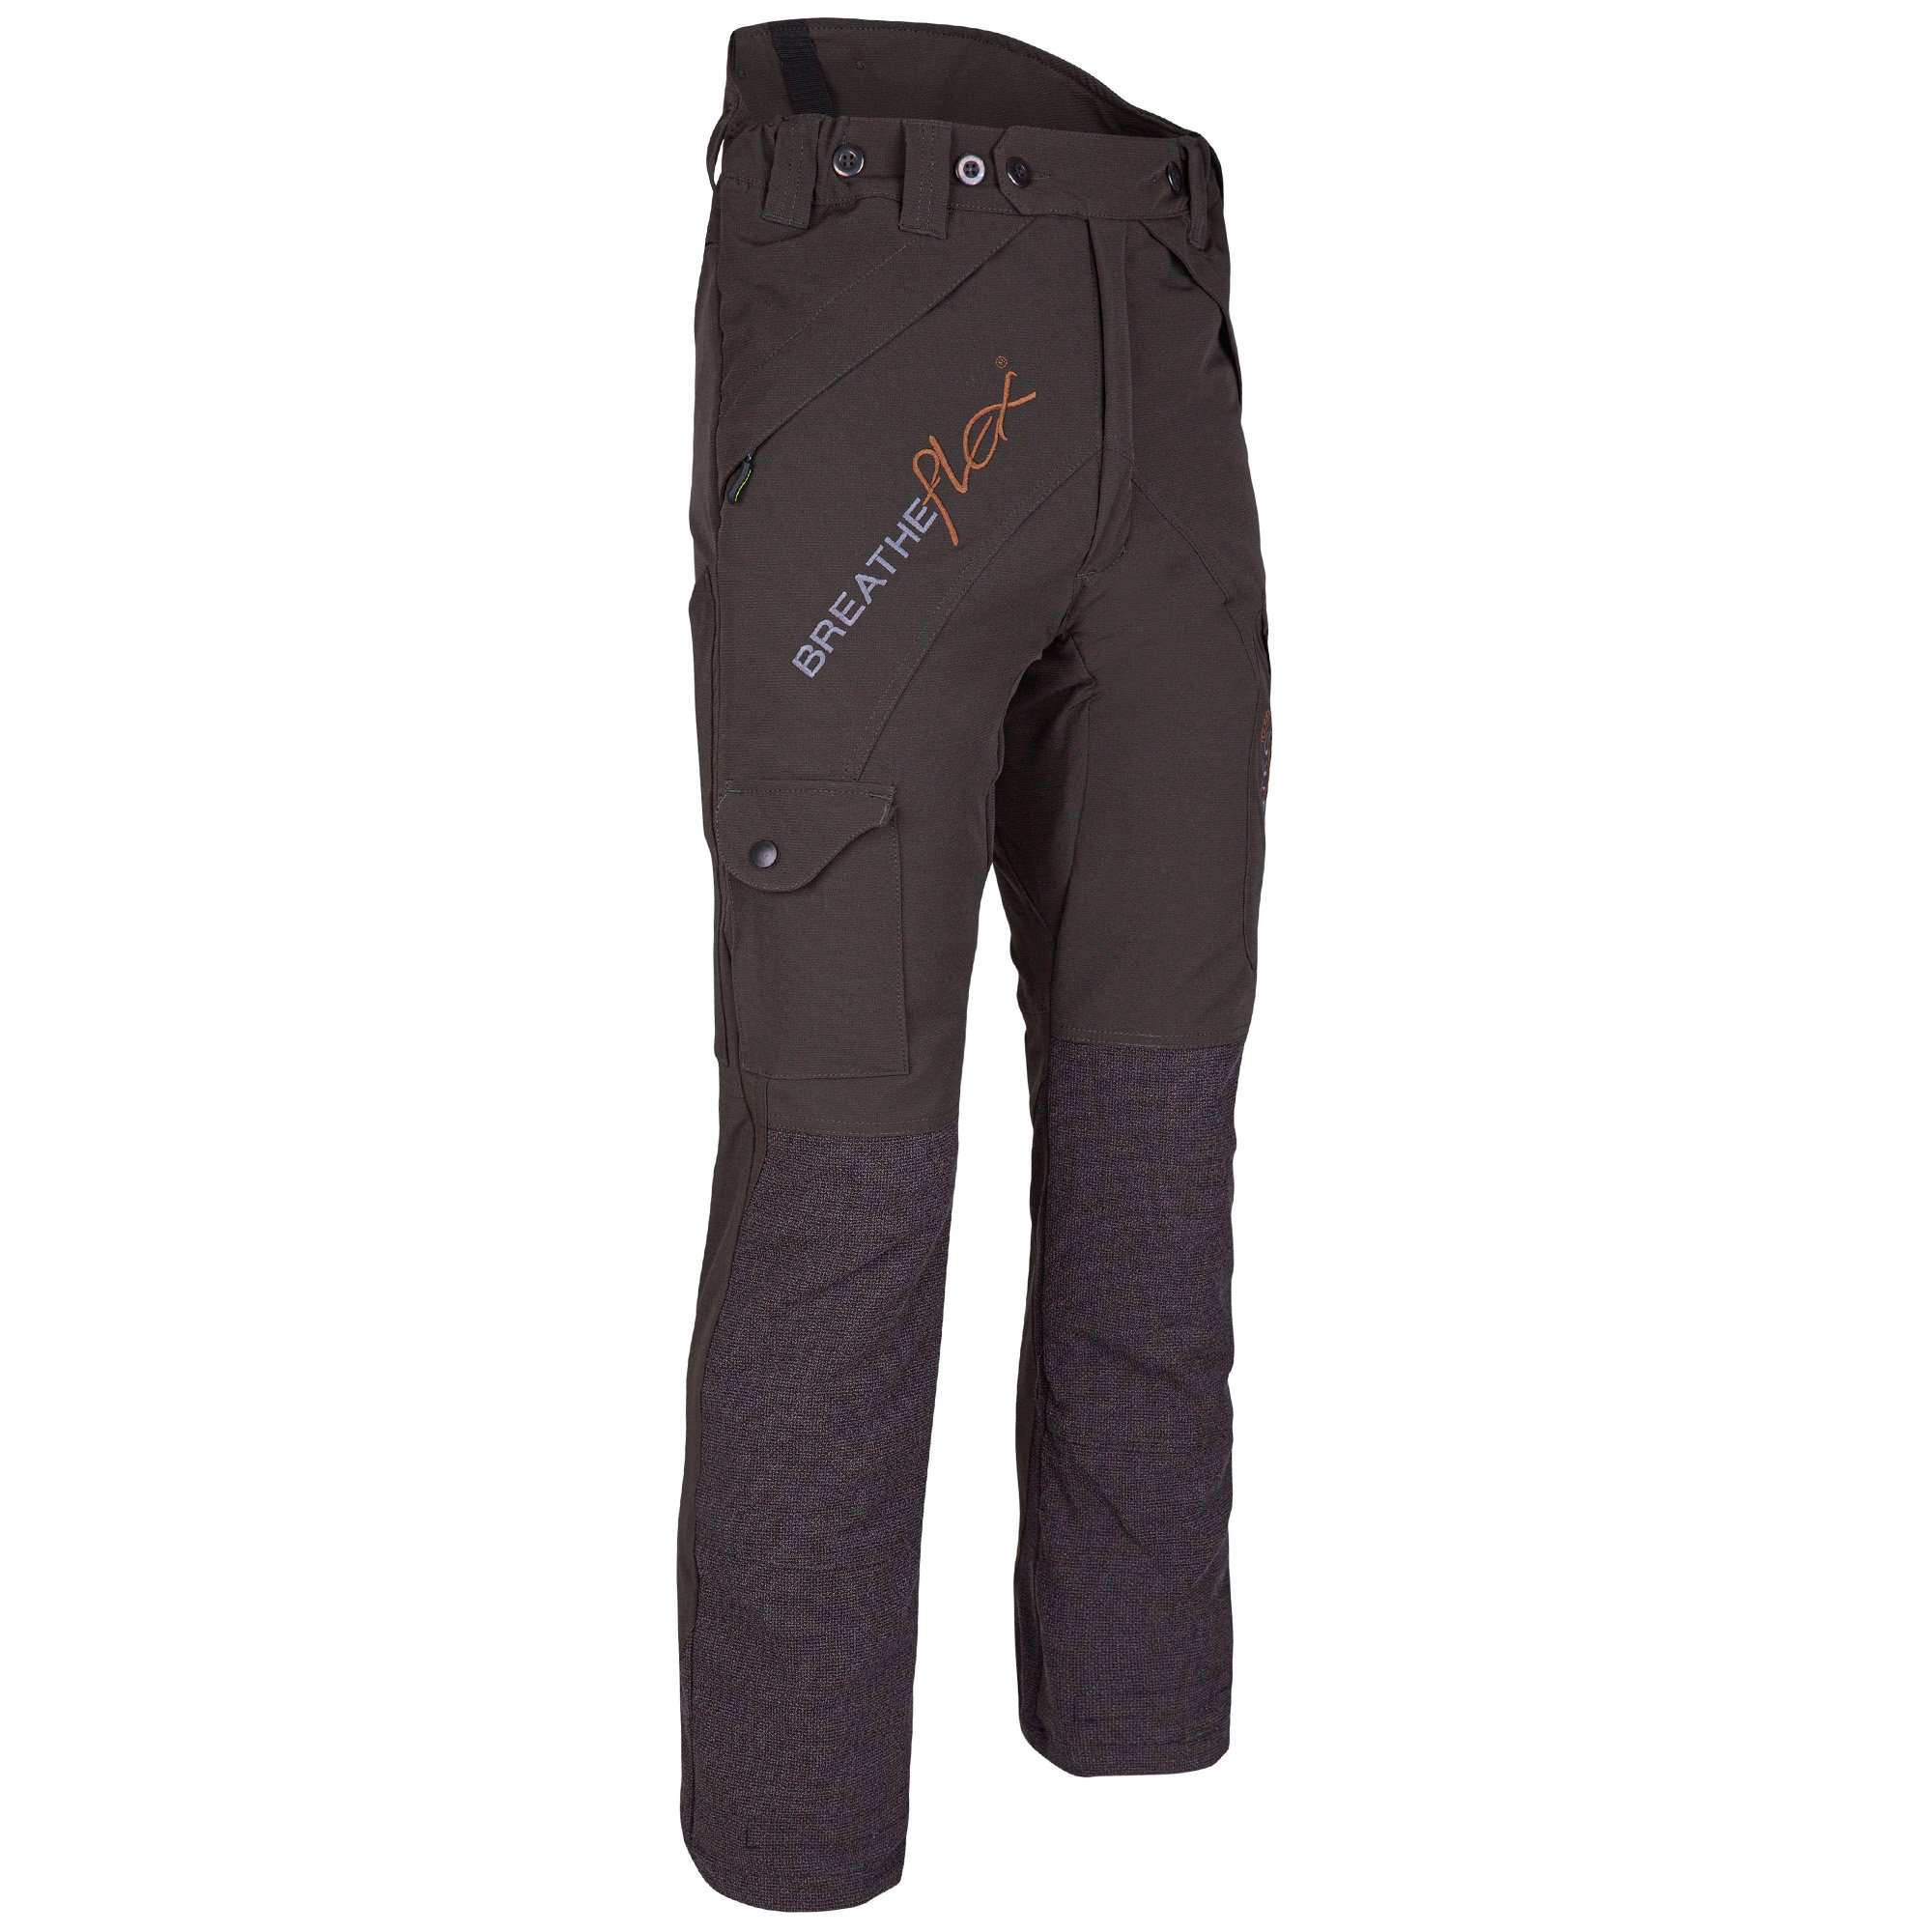 AT4010 Breatheflex Type A Class 1 Chainsaw Trousers - Olive - Arbortec Forestwear